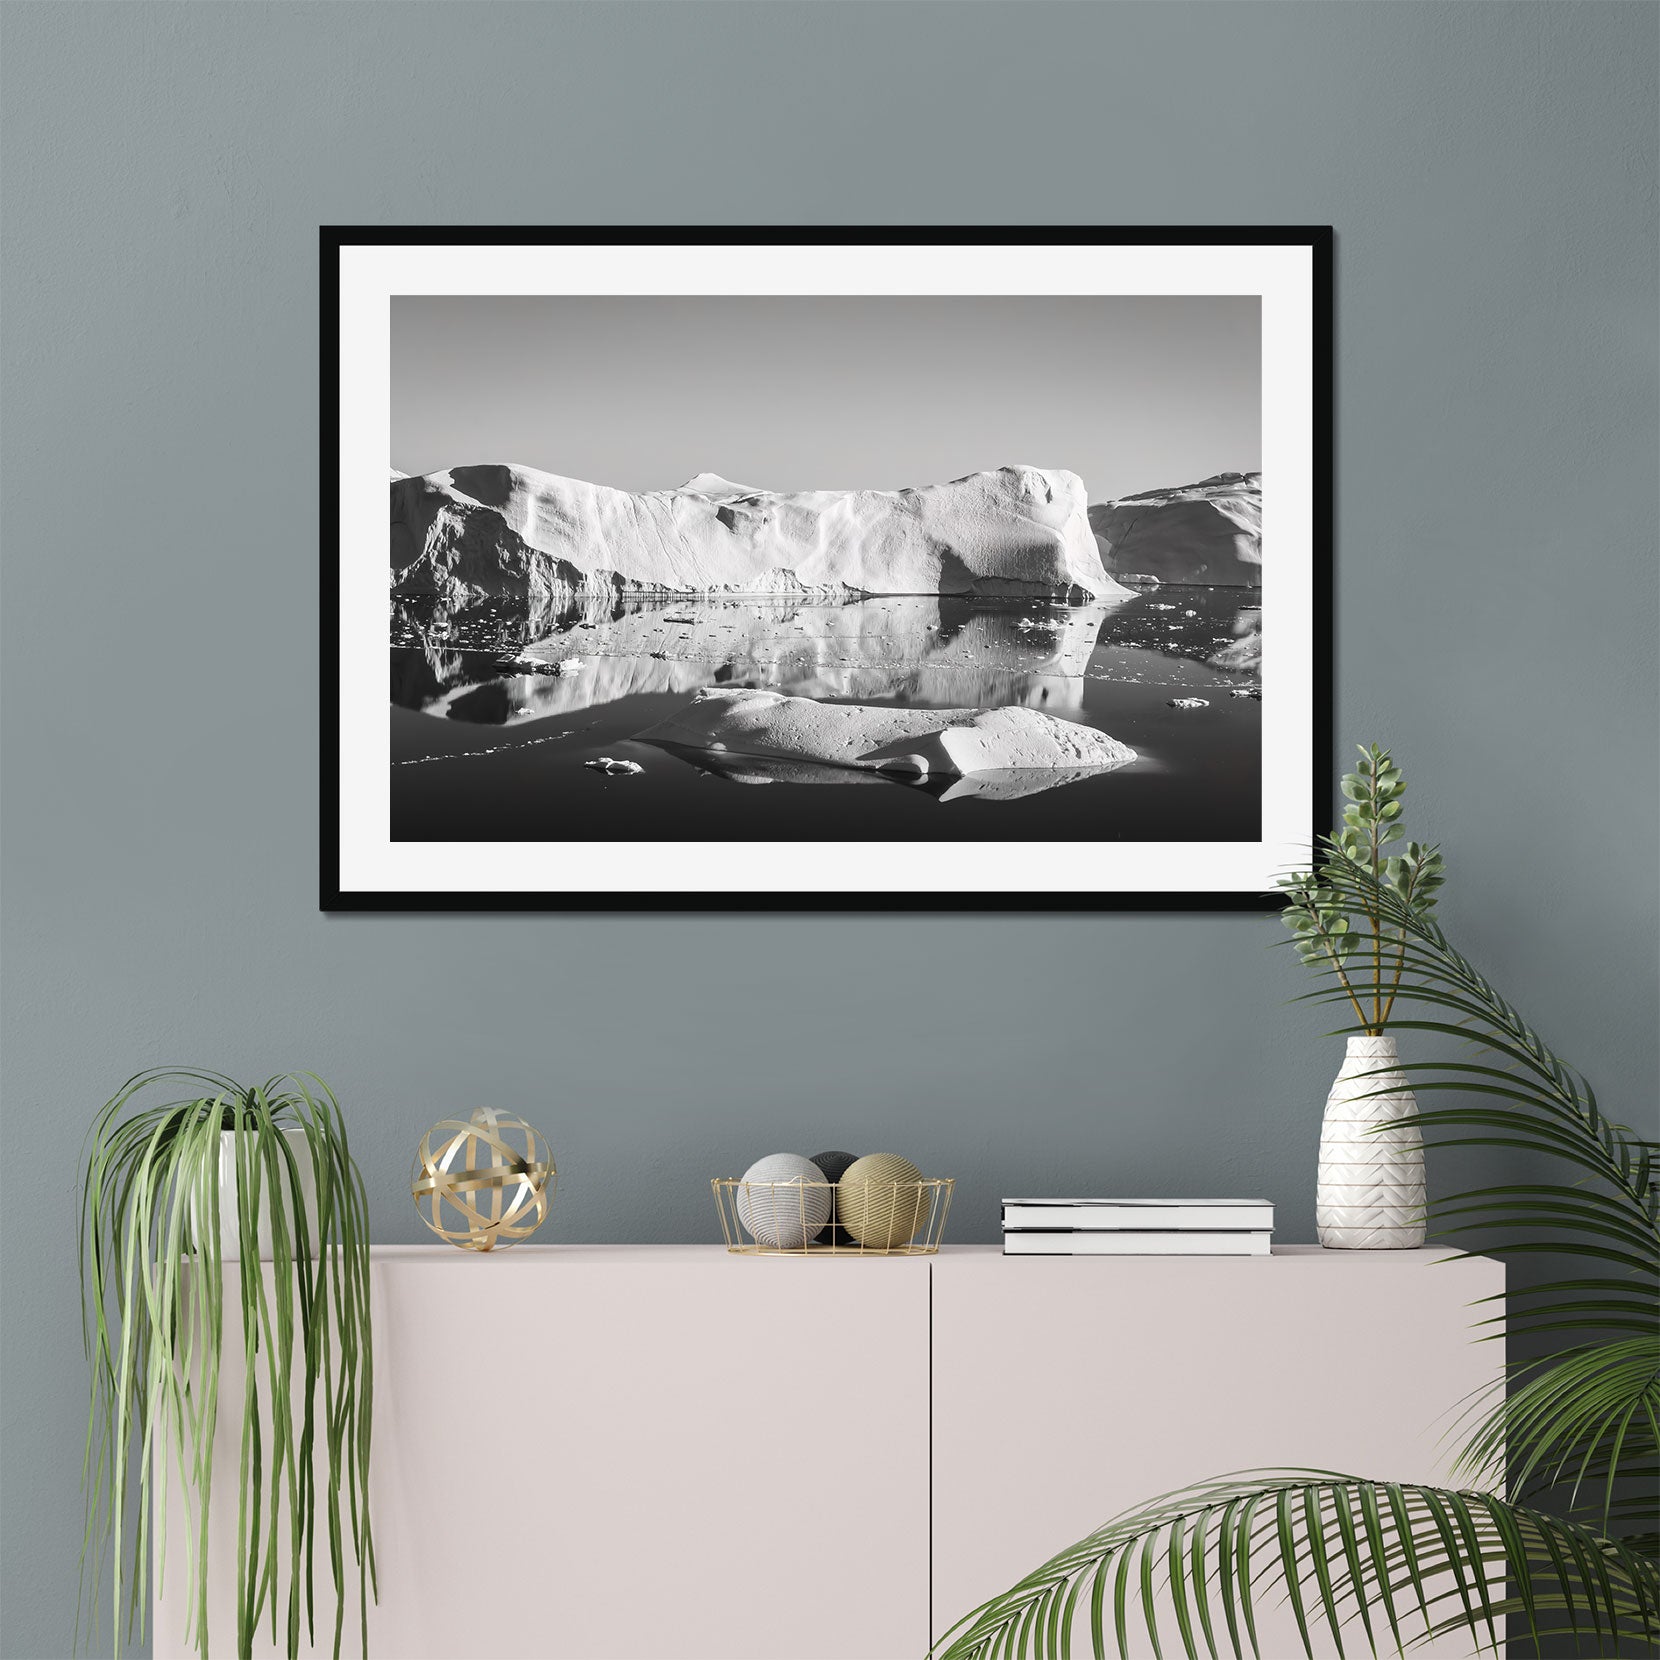 A framed black and white print of icebergs in Greenland